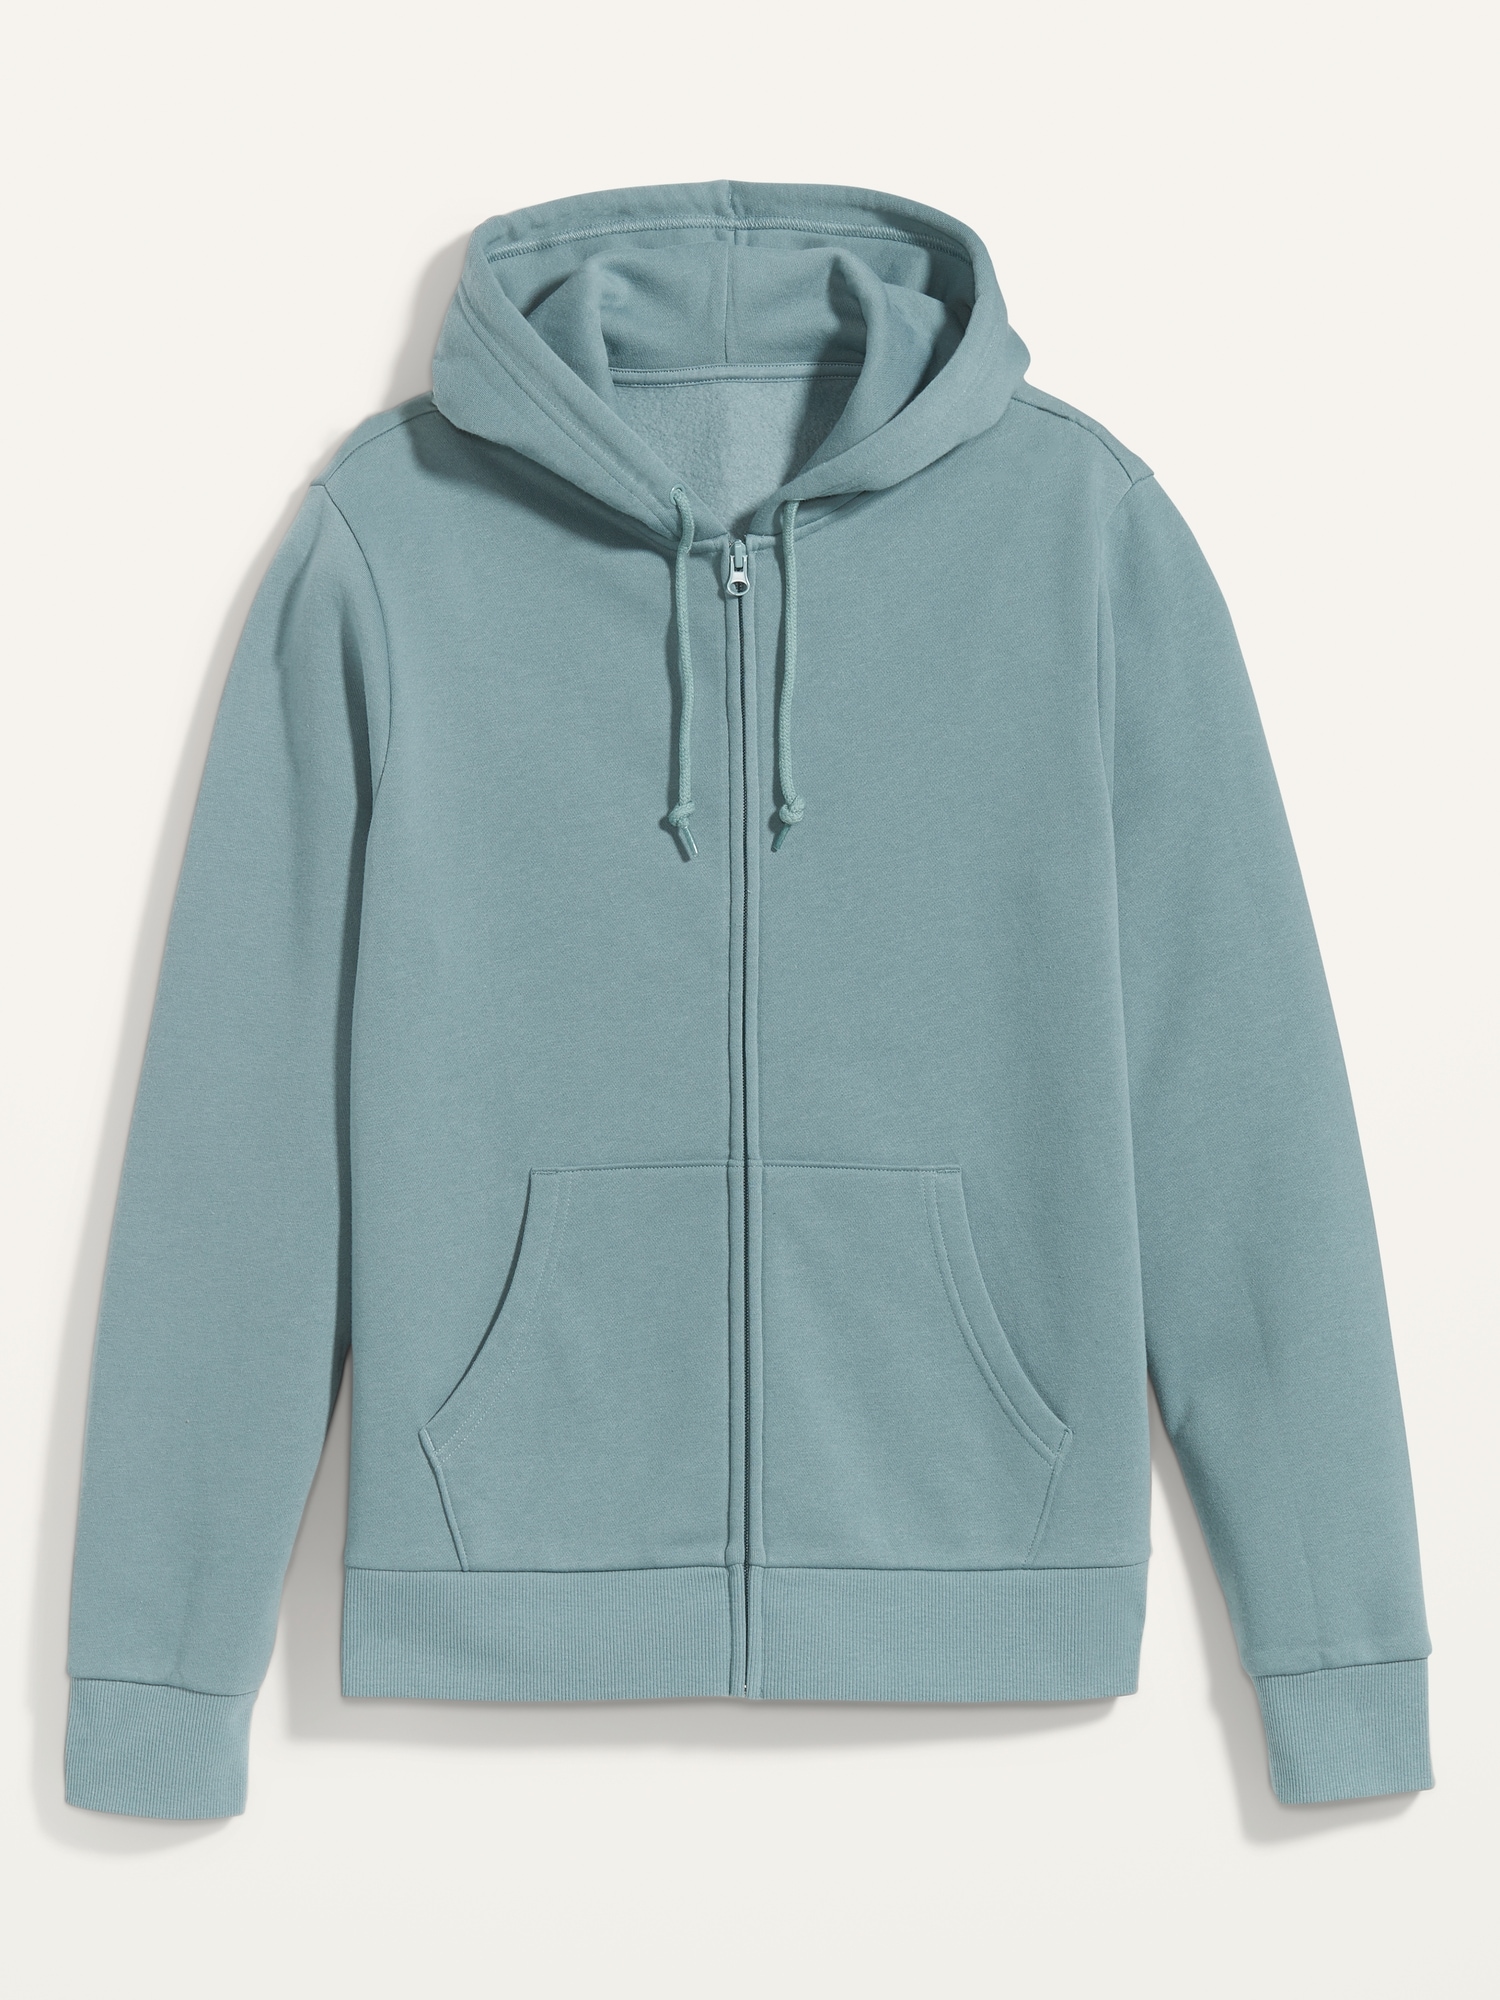 Gender-Neutral Zip-Front Hoodie for Adults | Old Navy